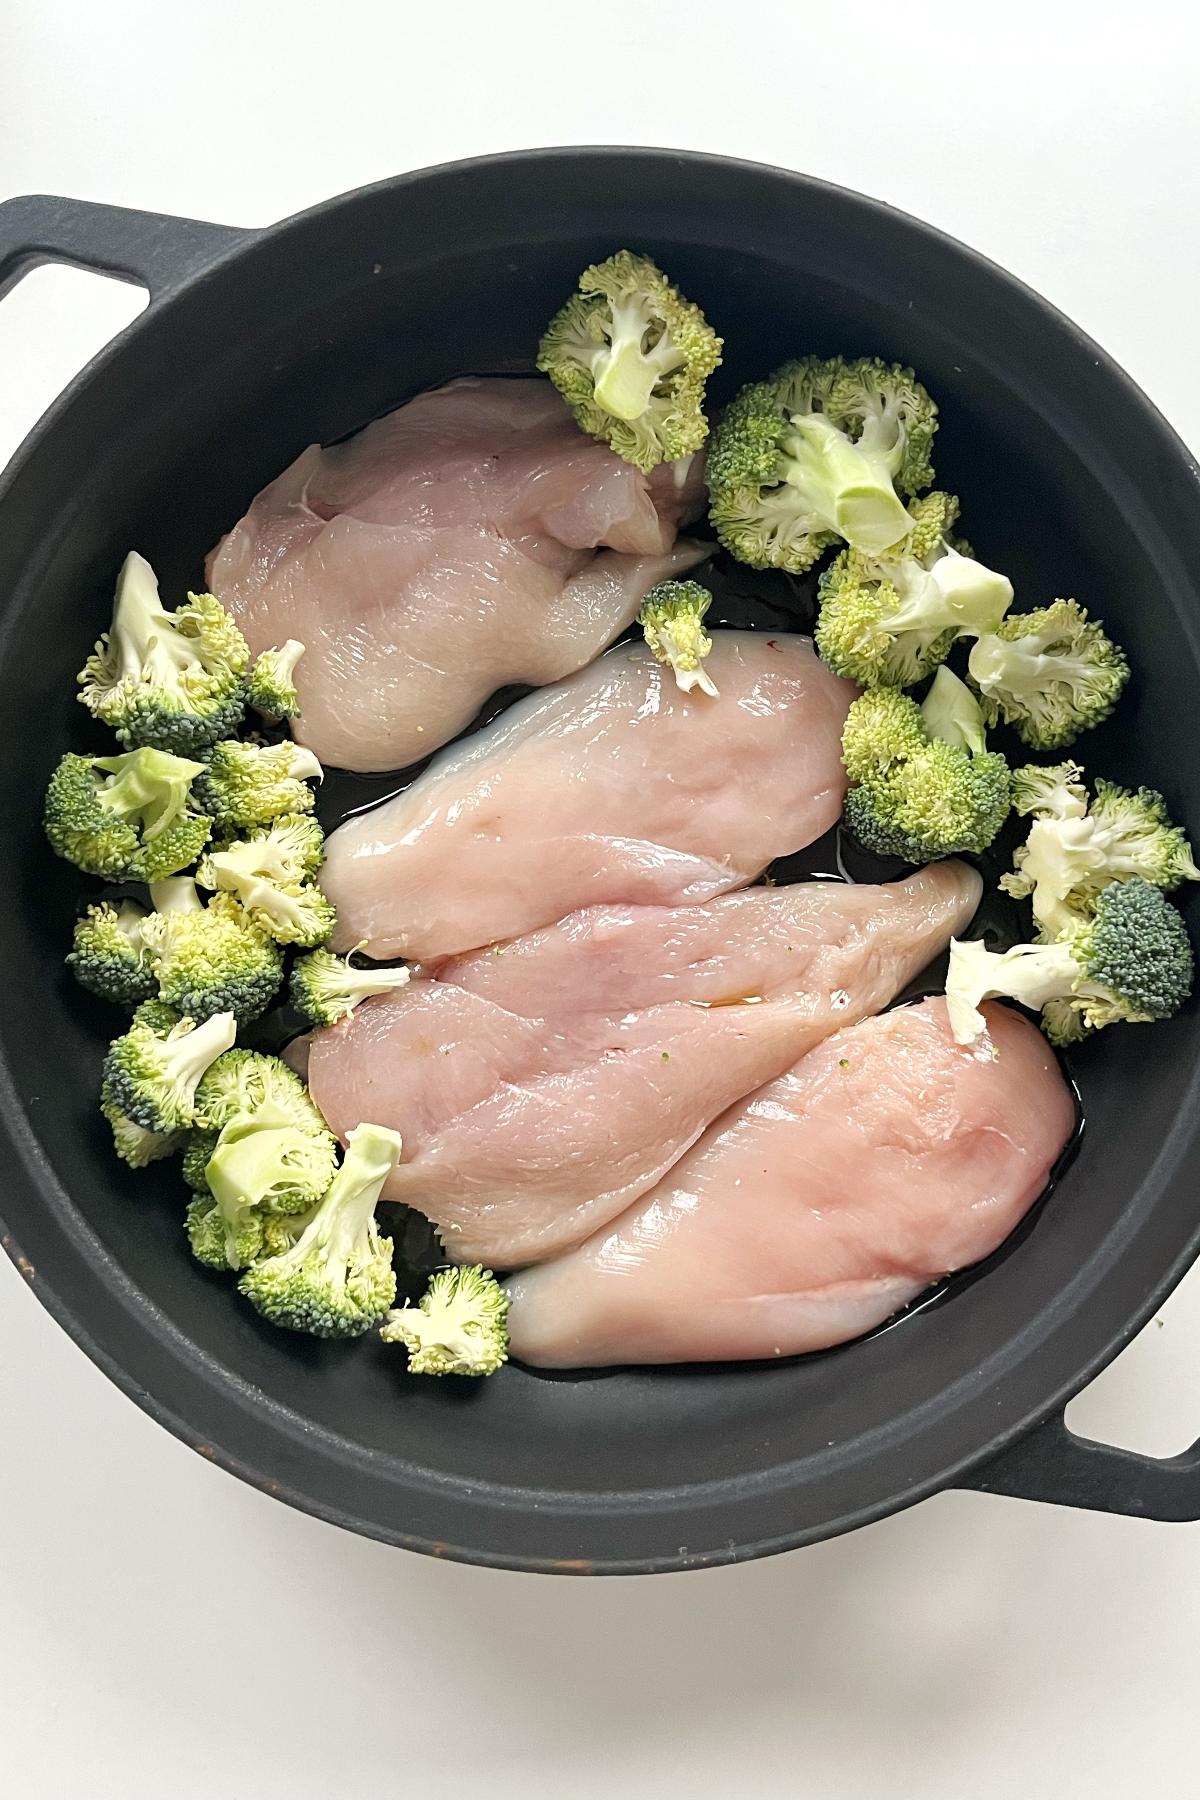 Black pan with 4 pieces of chicken inside and broccoli florets.